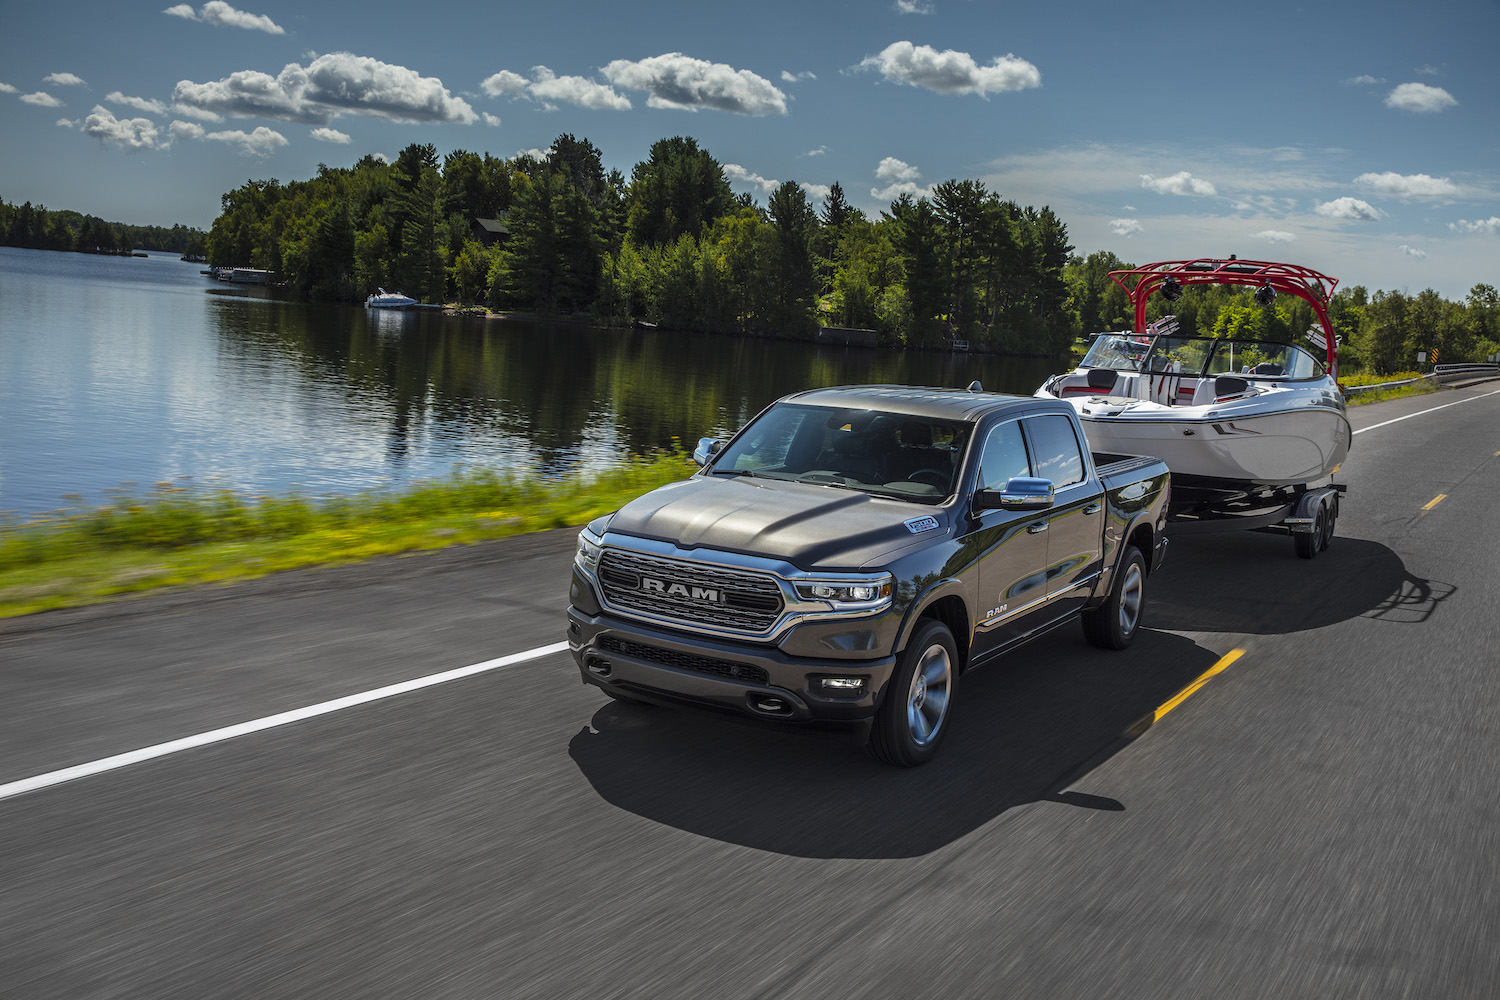 A diesel Ram 1500 towing a boat along a paved road, next to a pond.